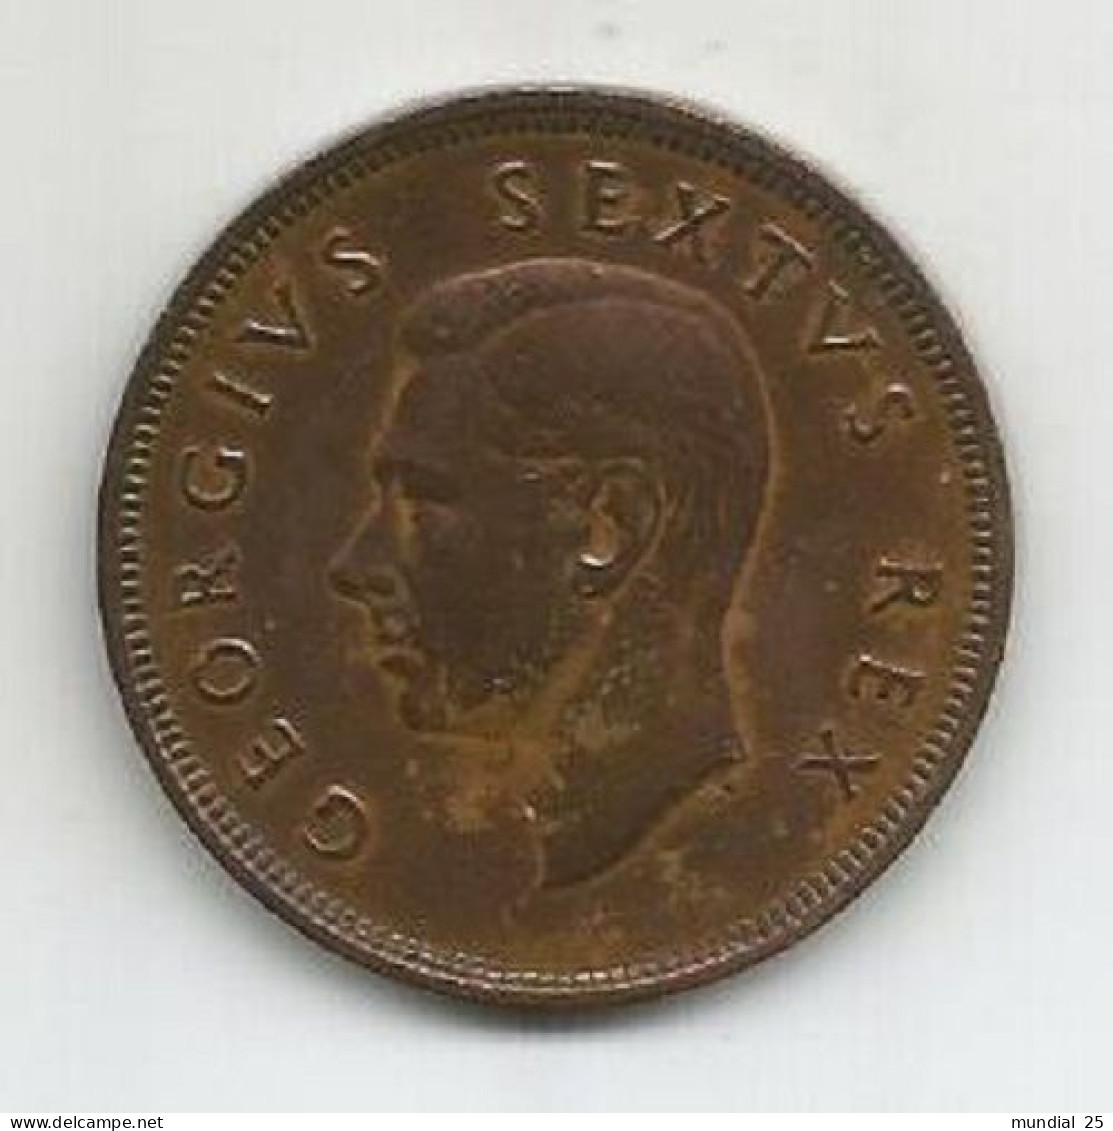 SOUTH AFRICA 1 PENNY 1950 - South Africa